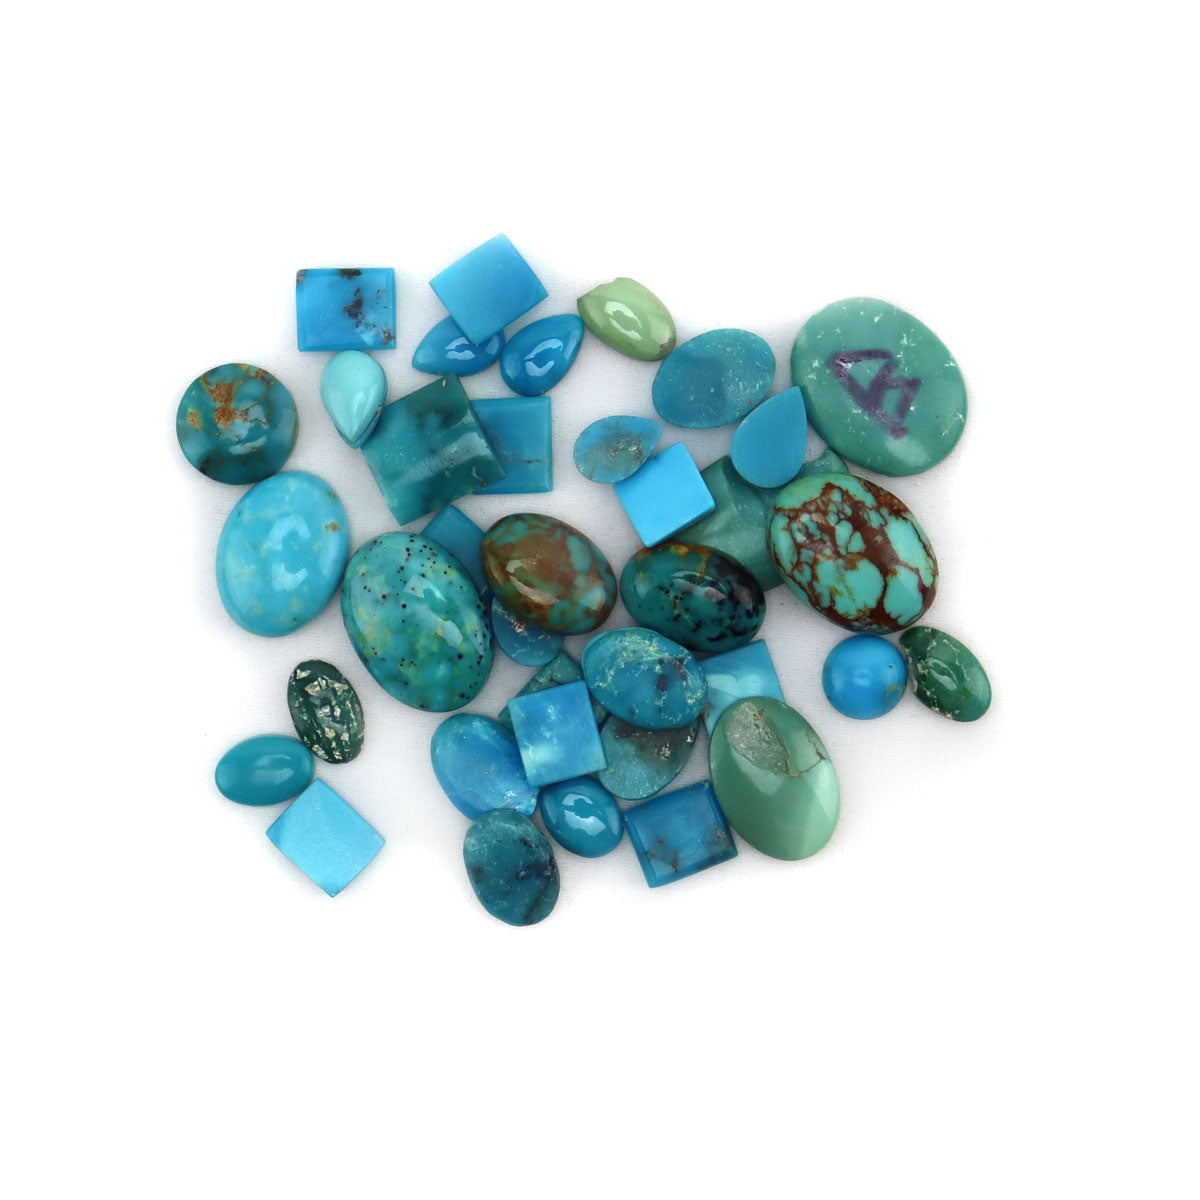 Turquoise Cabochons, 6,220 Carats (J13451-CO)27